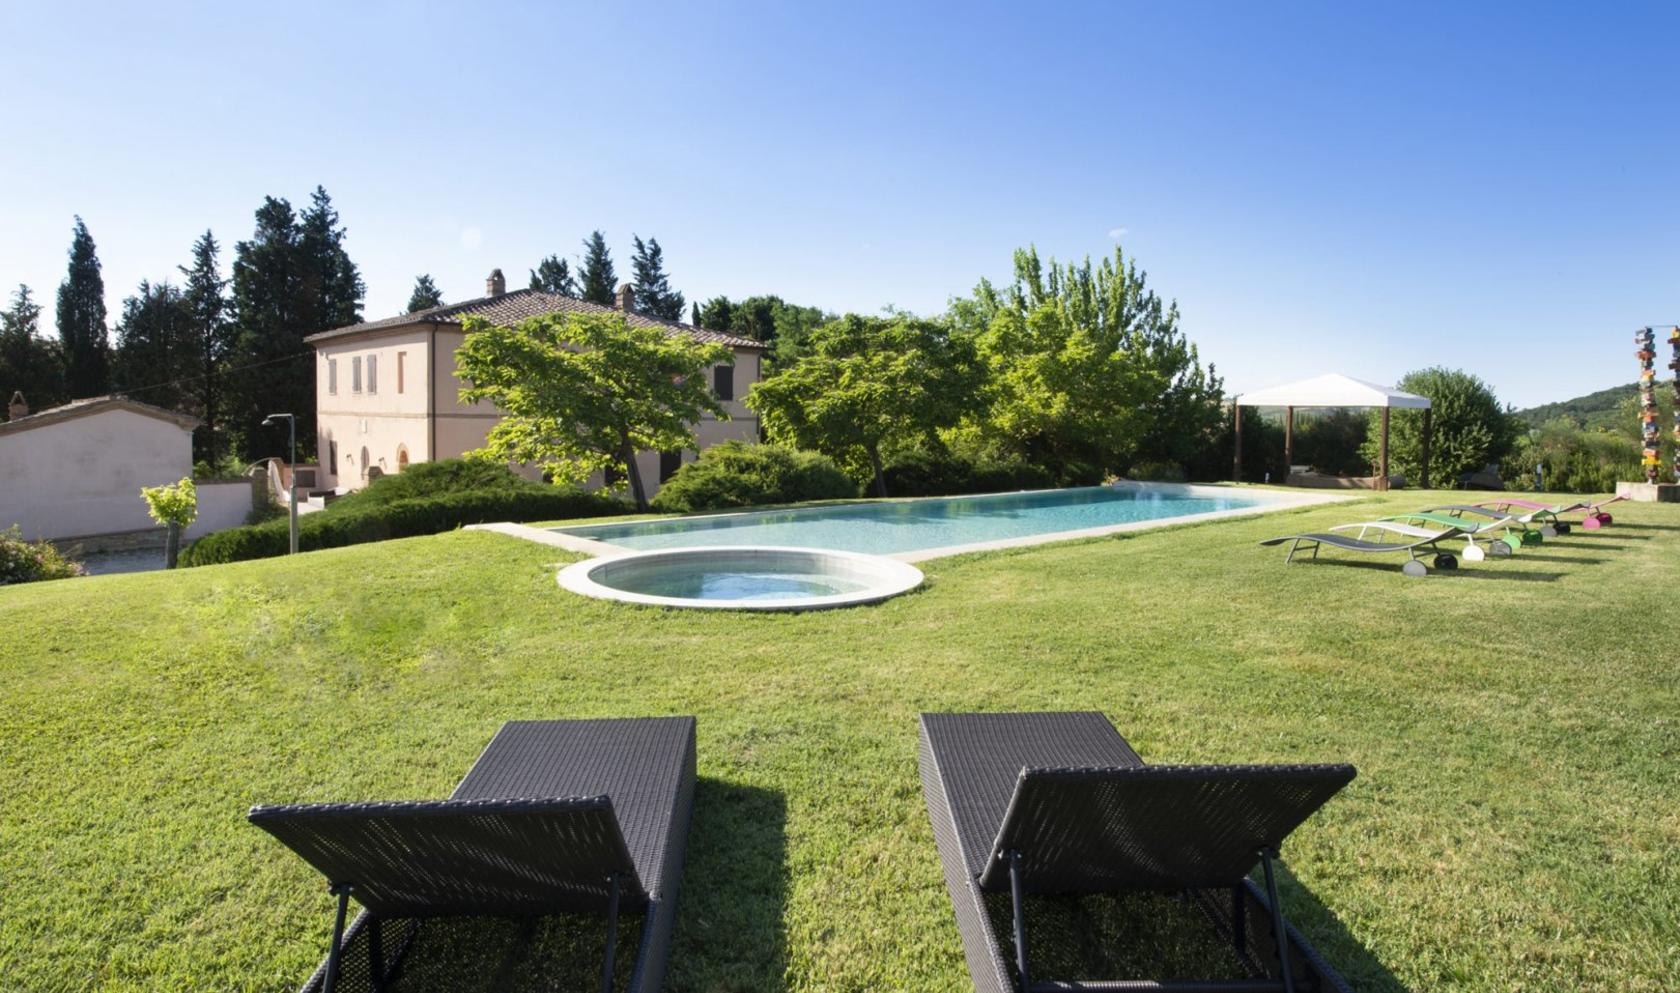 Toscana Immobiliare - Luxury villa with pool for sale on the Tuscan hills in Montalcino